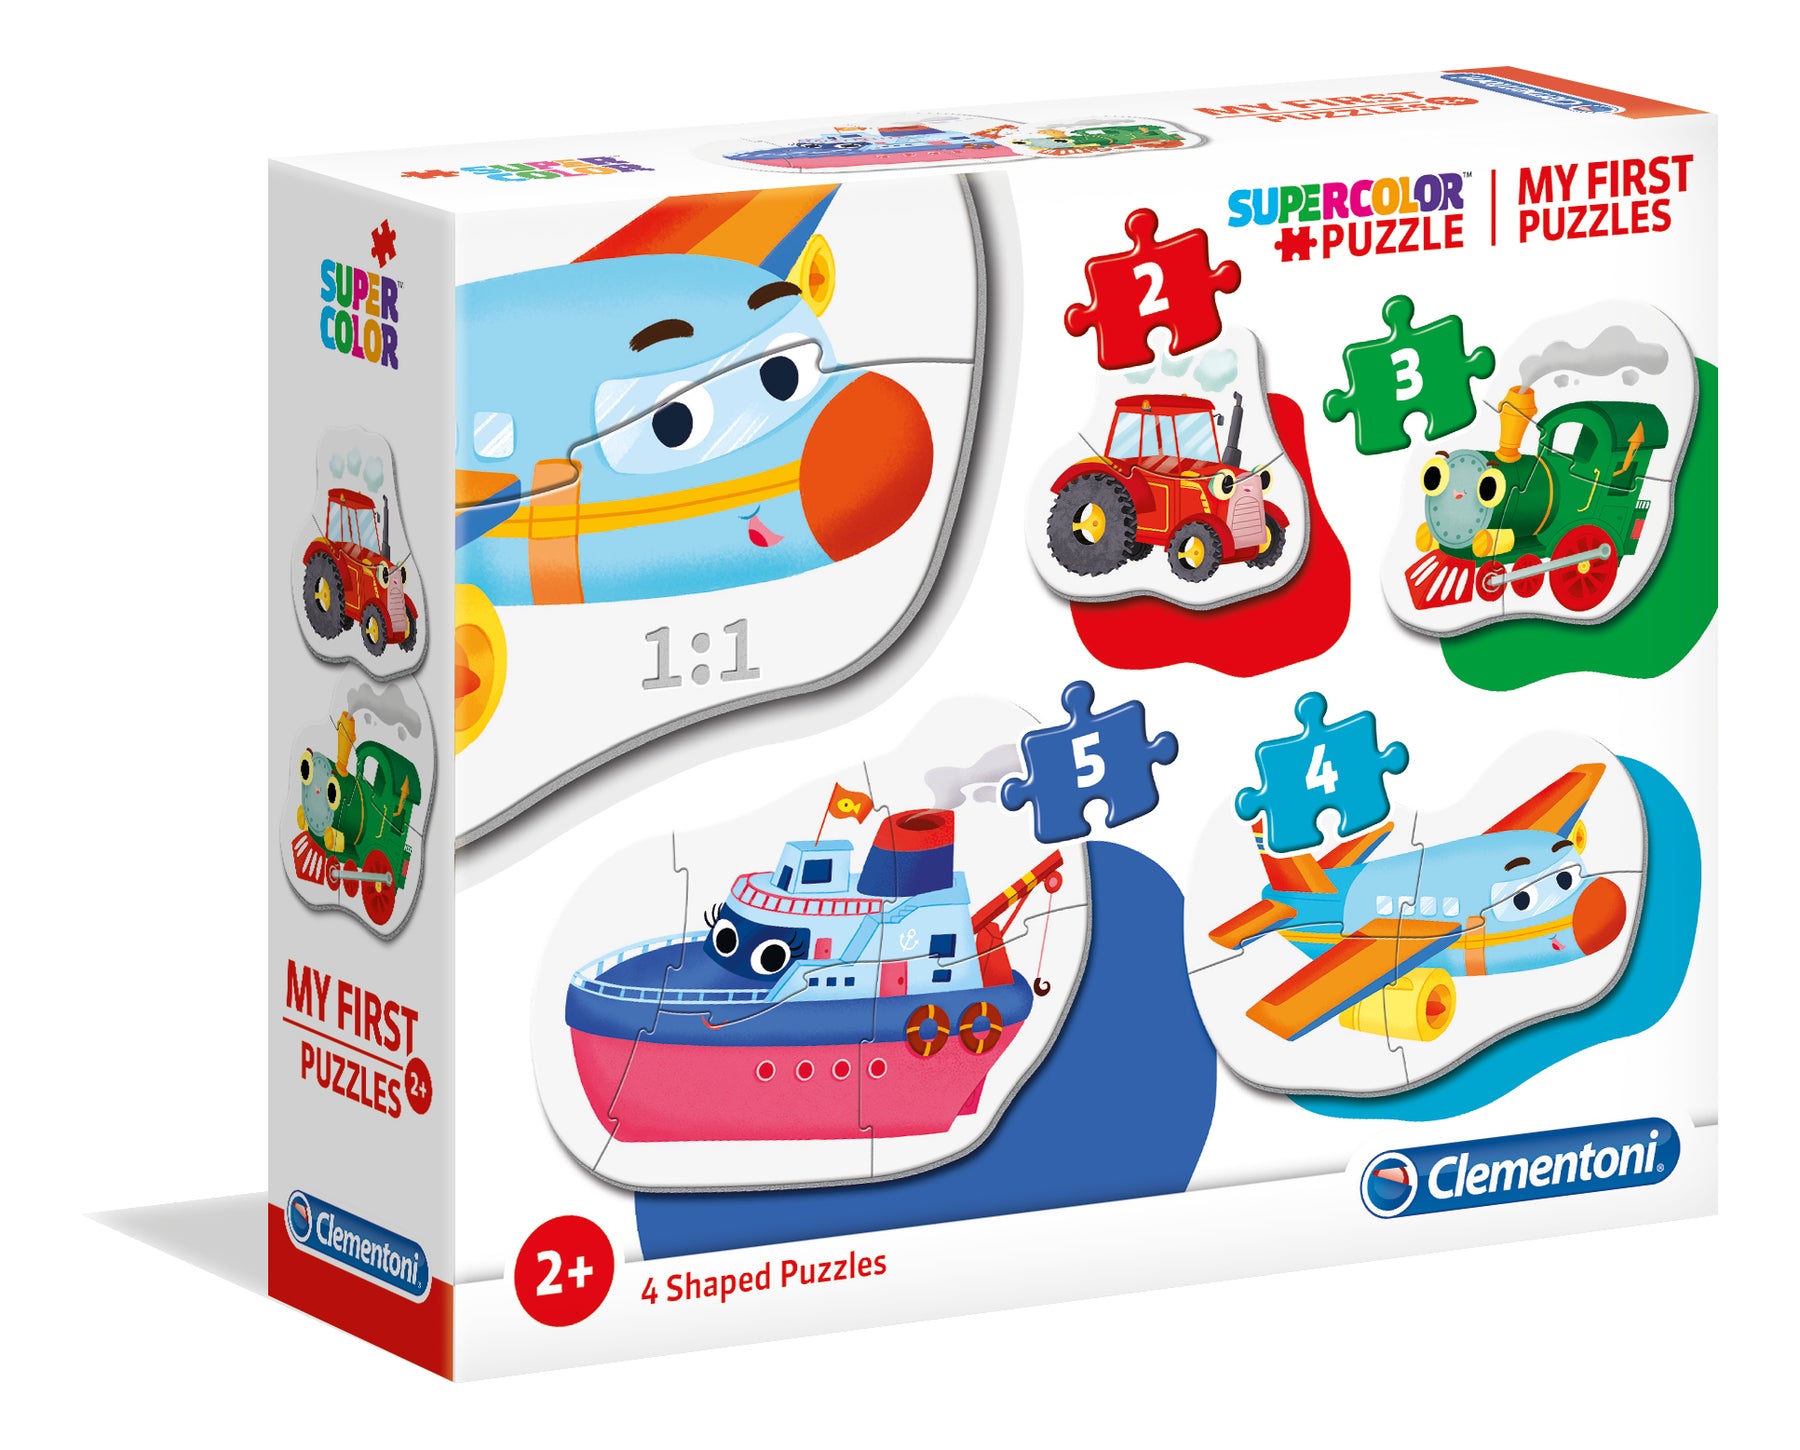 My first puzzles "Clementoni" - Transports